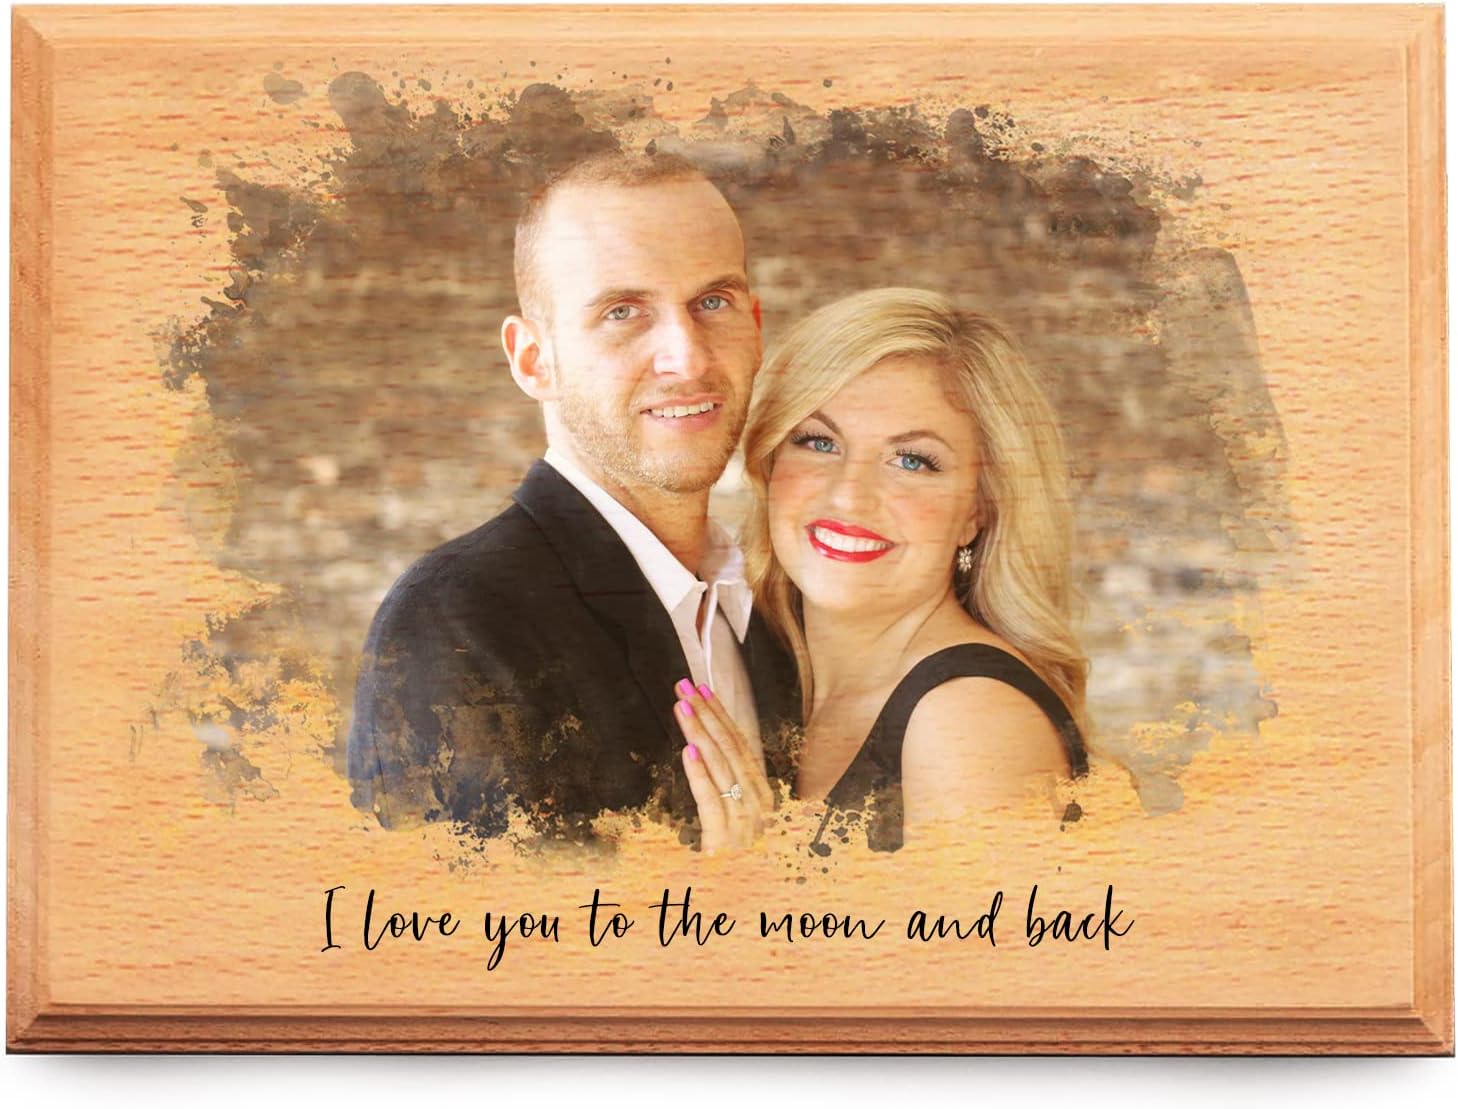 Customized picture frame - Gift Ideas for a Police Academy Graduate